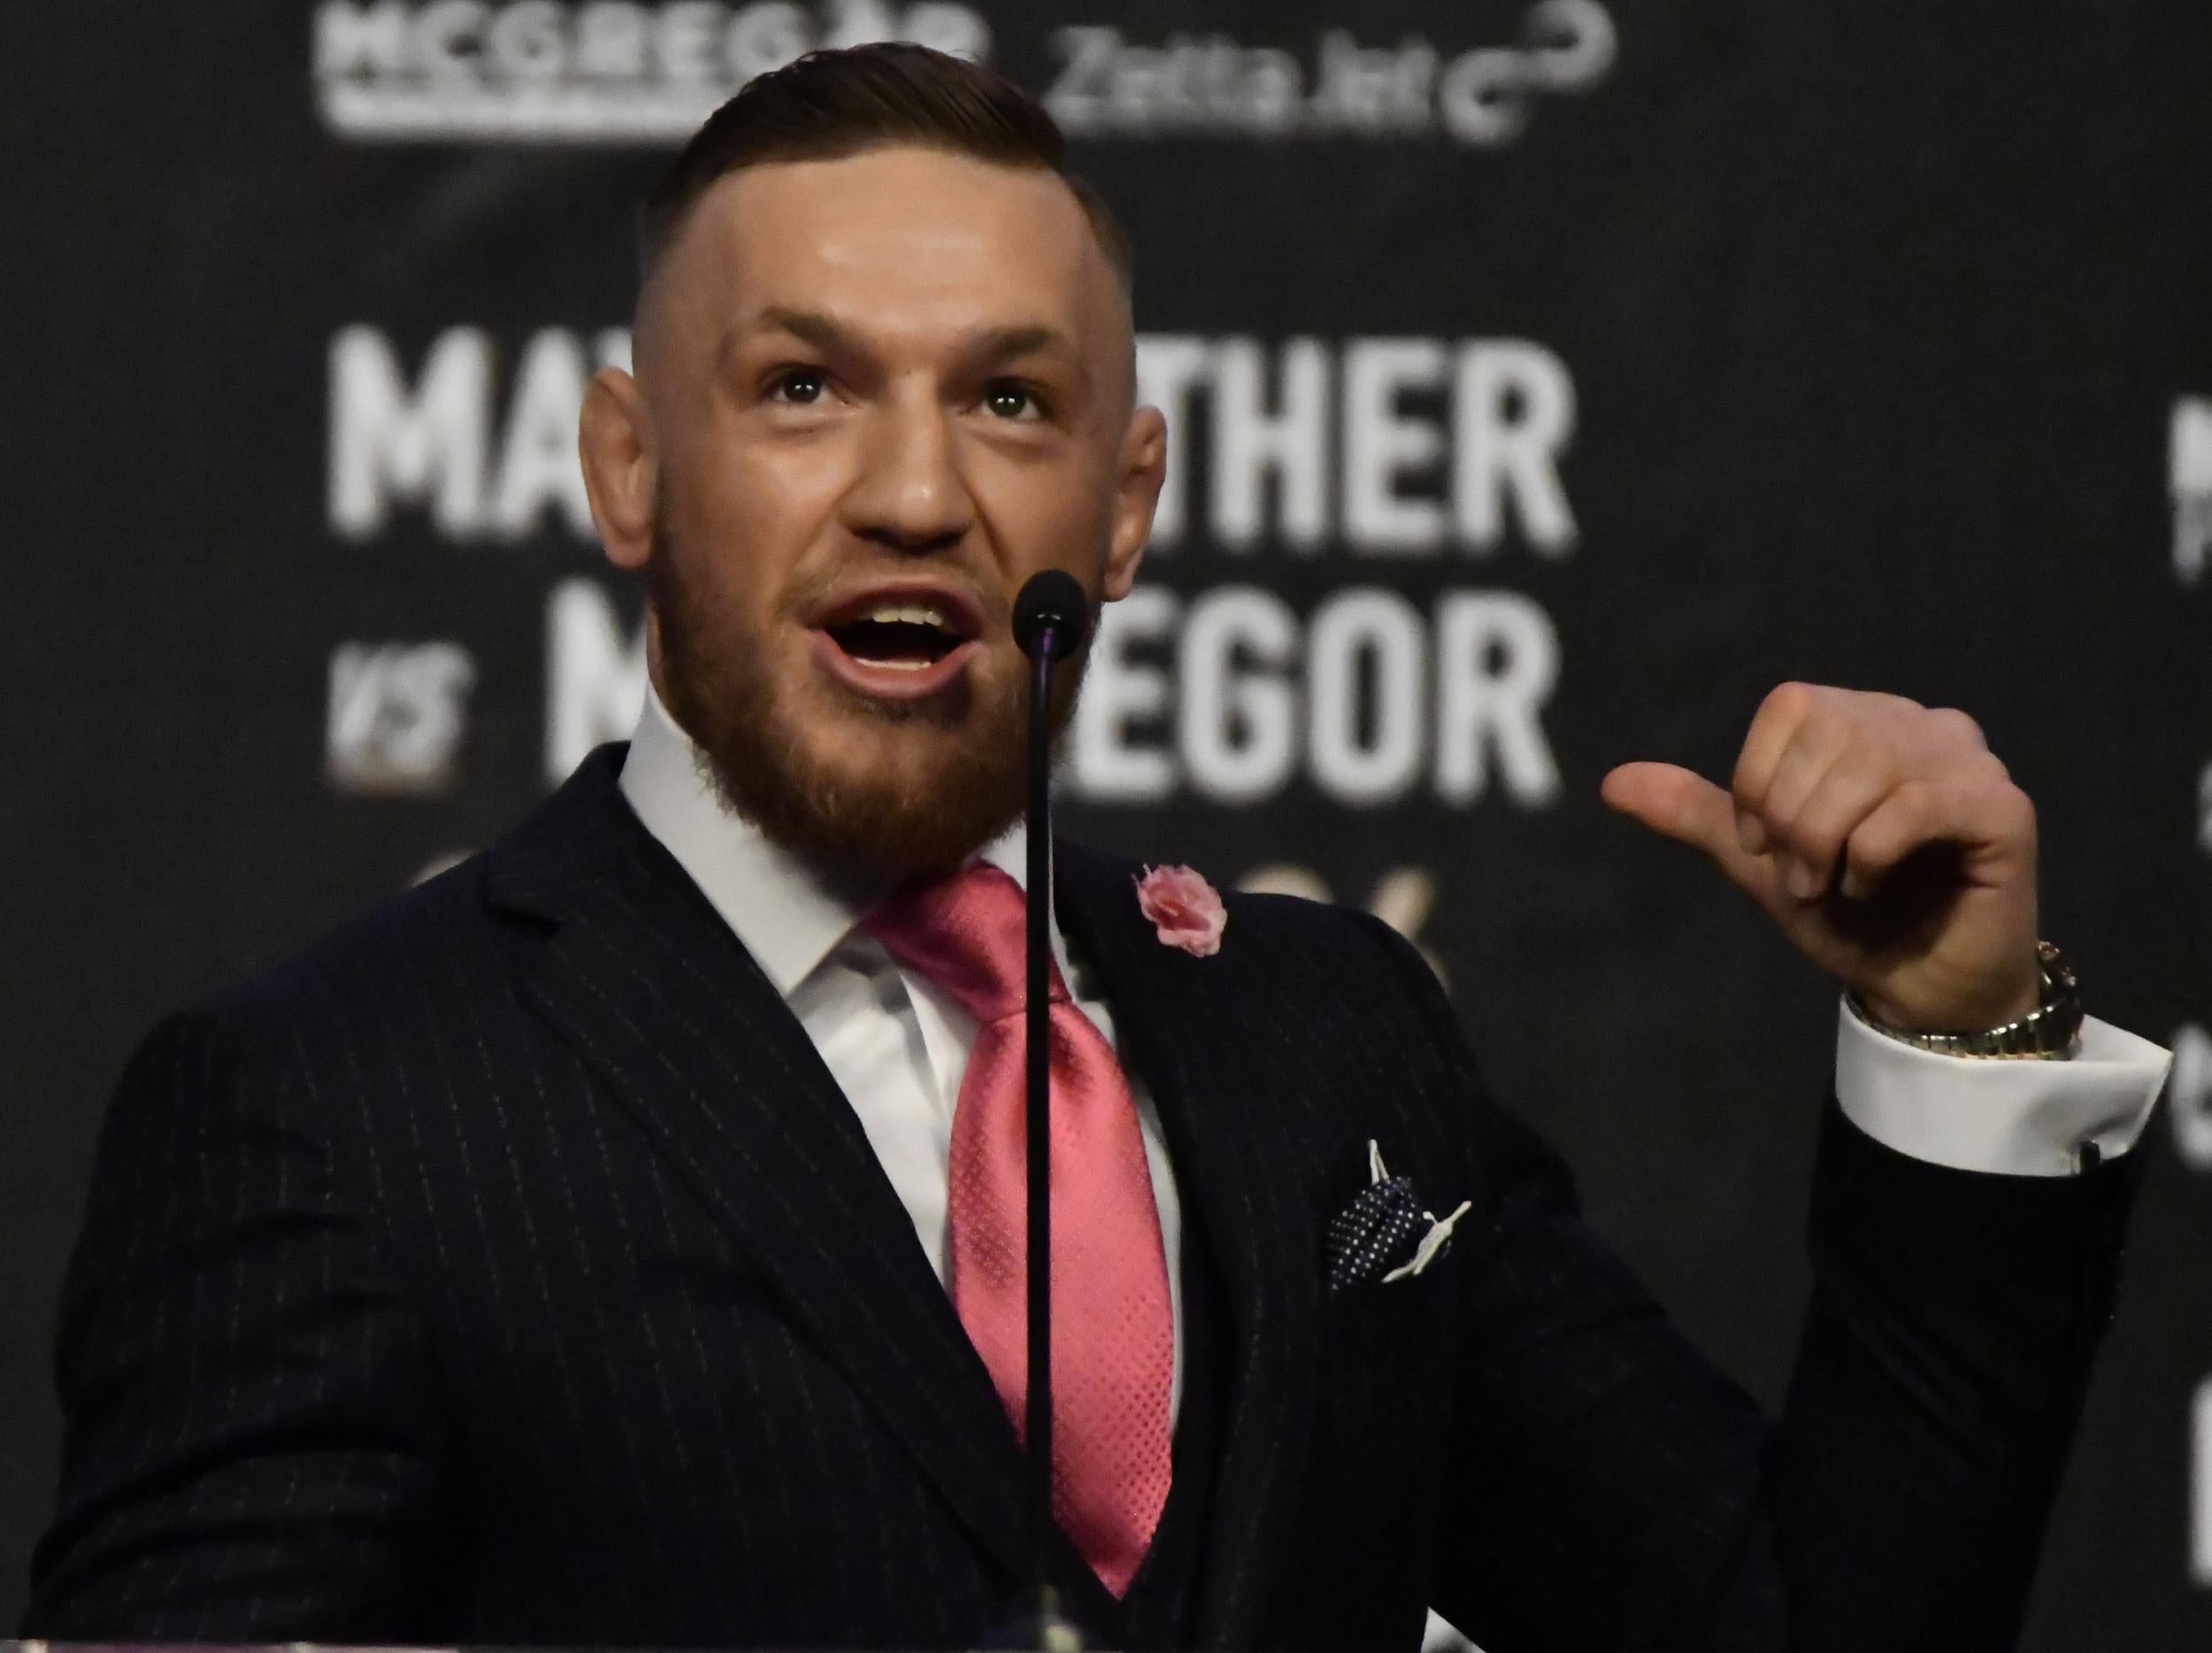 McGregor is confident he can become the first man to defeat Mayweather